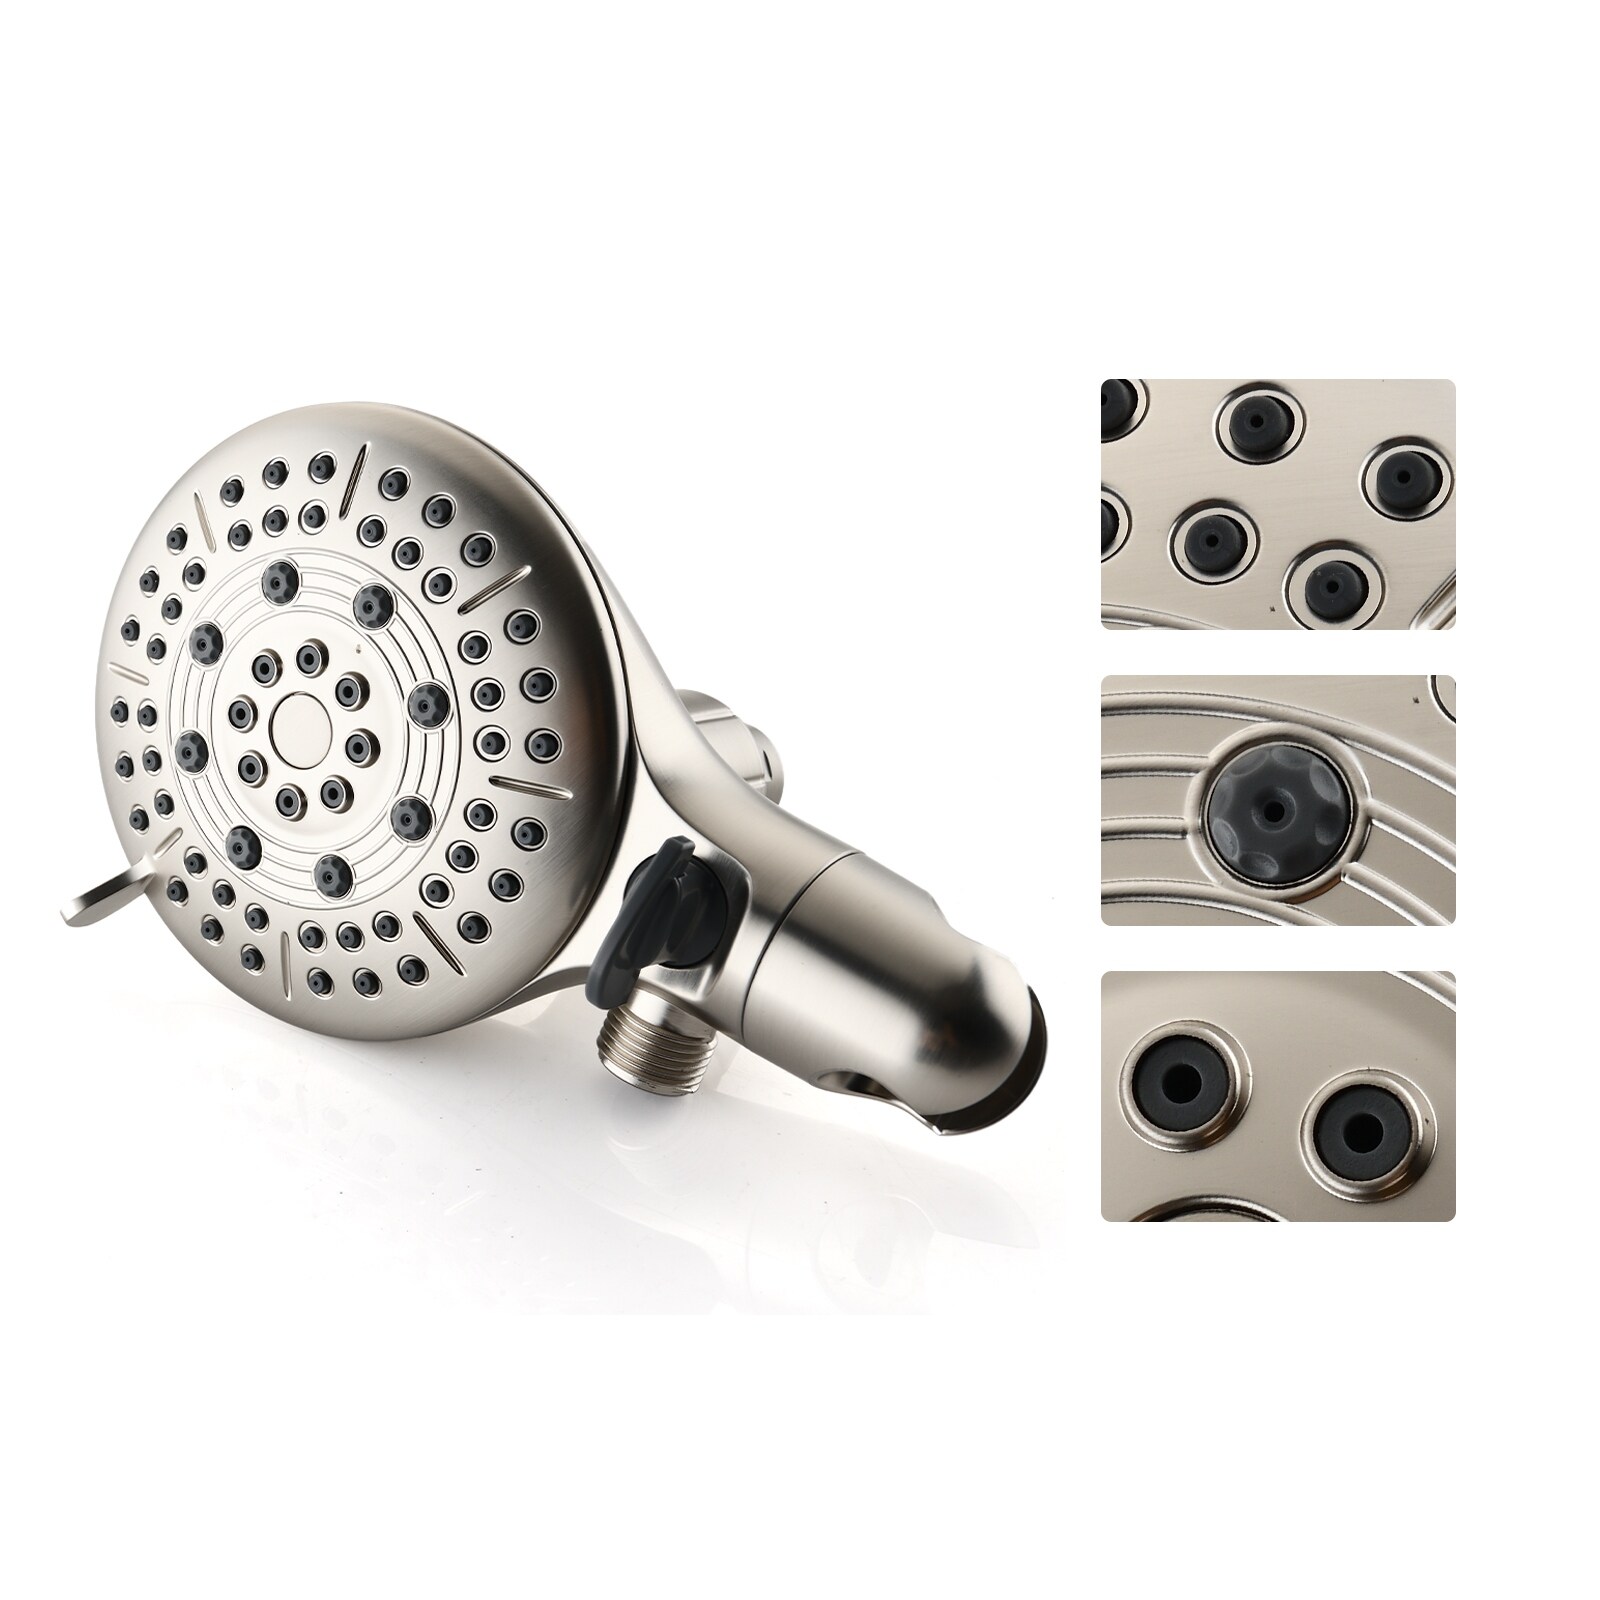 https://ak1.ostkcdn.com/images/products/is/images/direct/3ea0f871befd4cb7701d08d3a8017b5a331901b6/Proox-6-Sprayer-Rainfall-shower-Faucet-System-Handheld-Shower-Combo-Set-Valve-Included.jpg